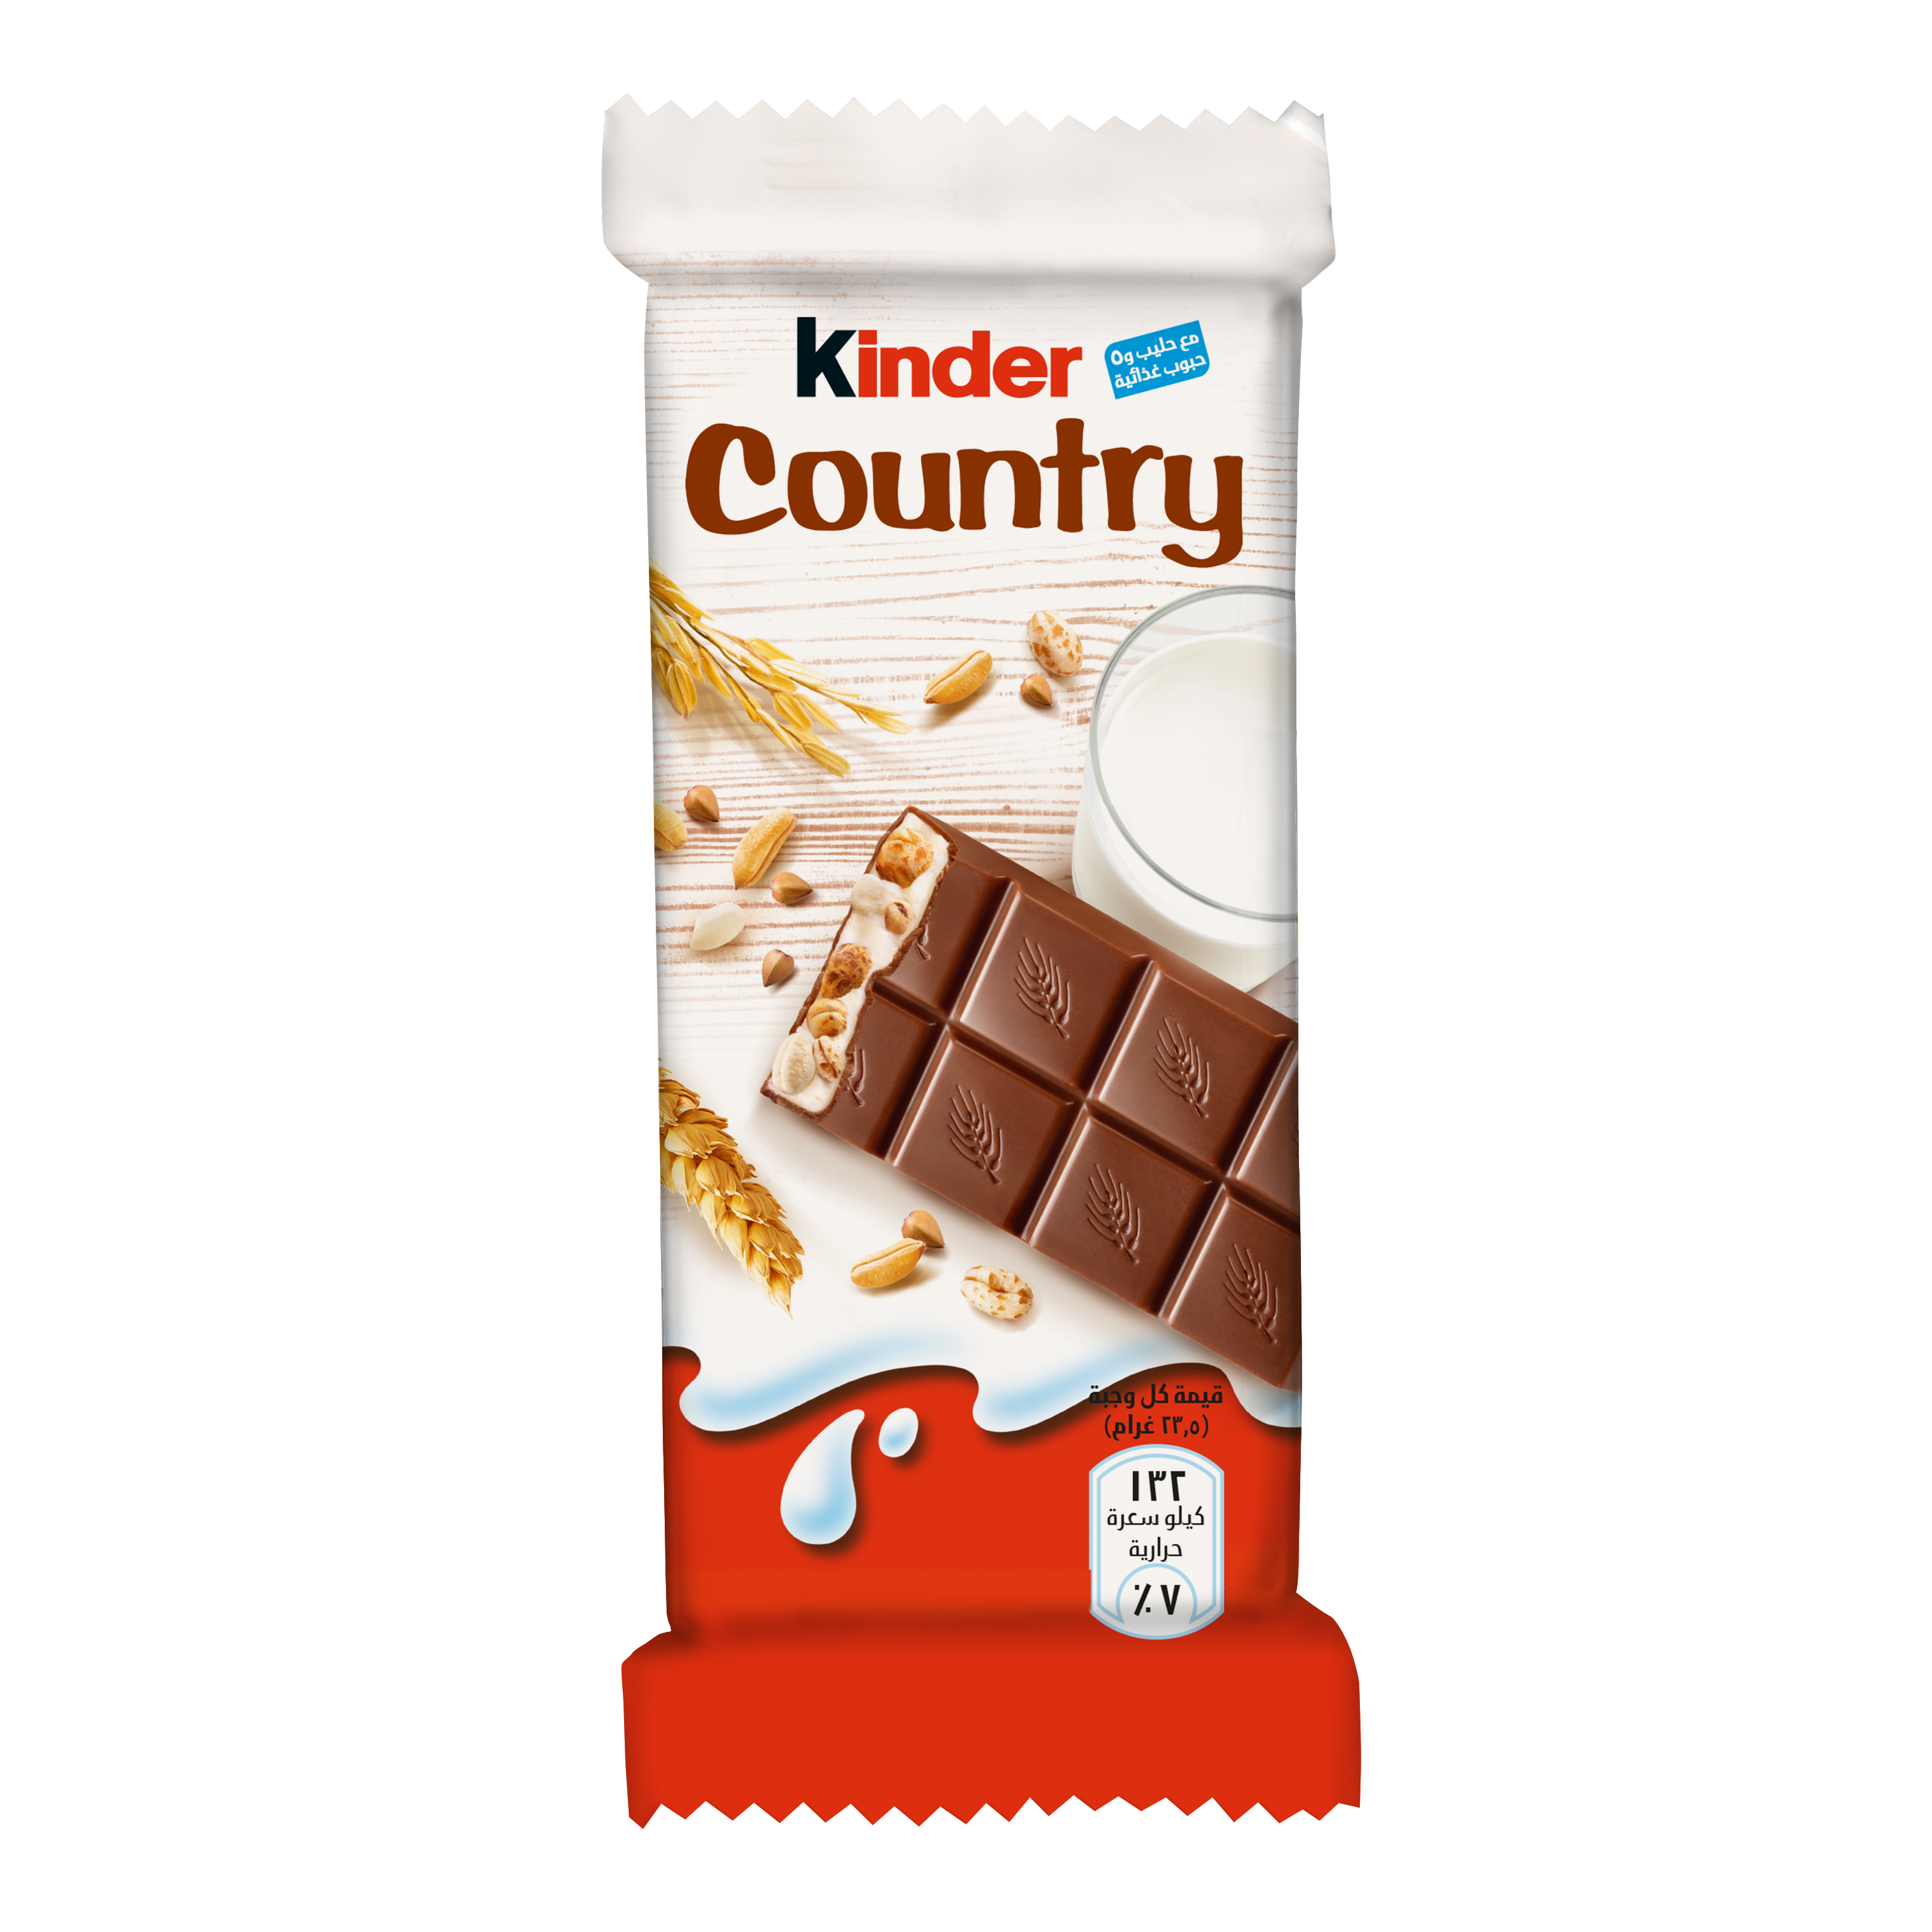 Kinder country 1 png